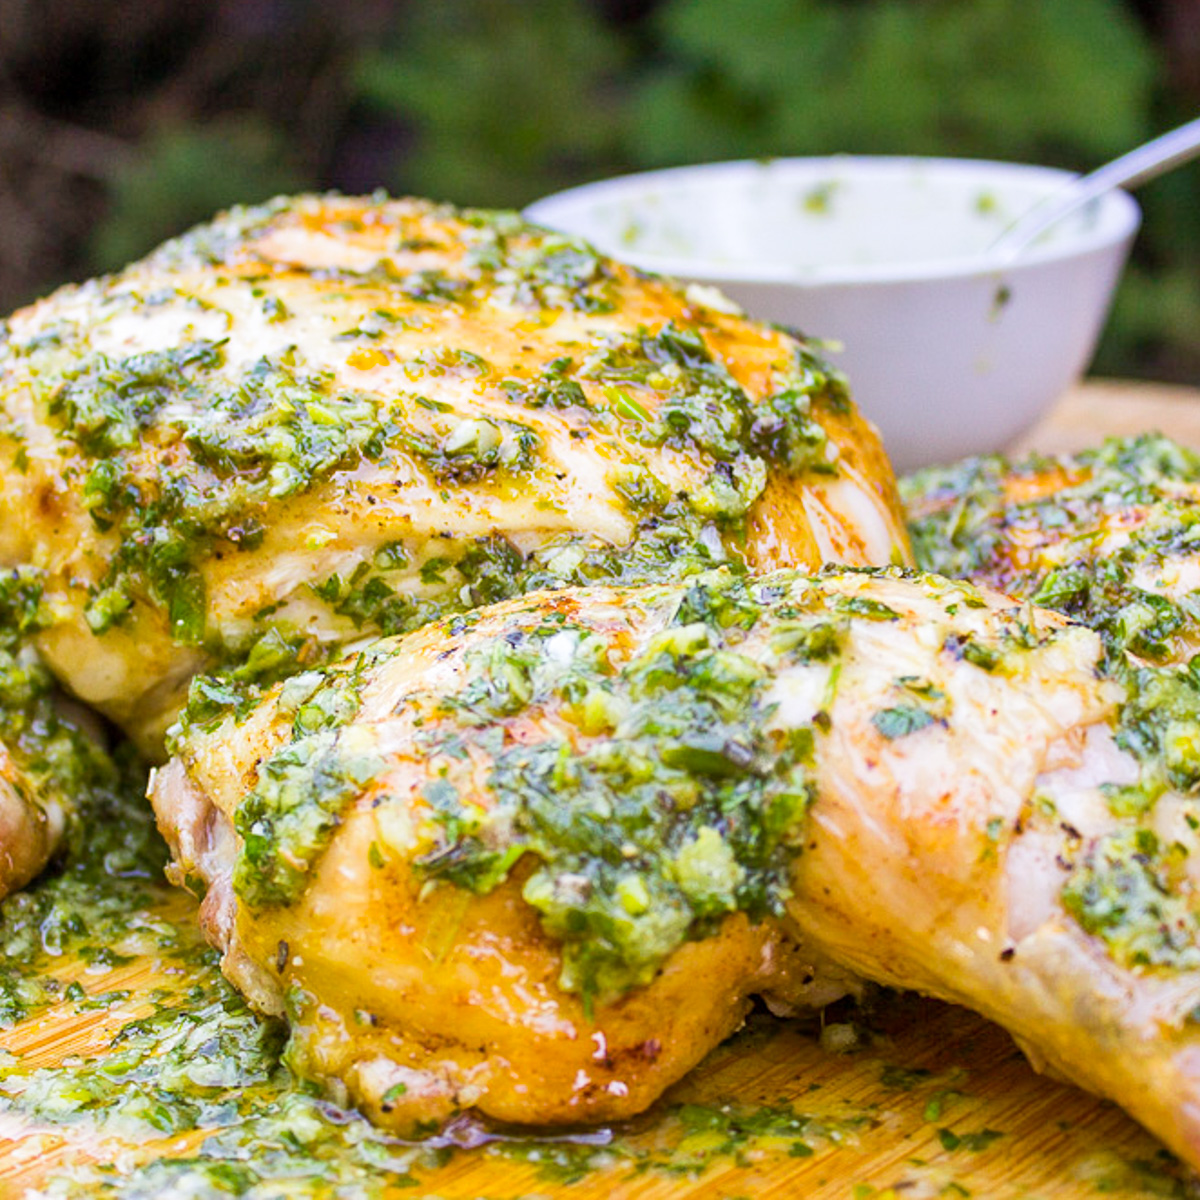 Lemon and Herb Chicken (with a cool technique)